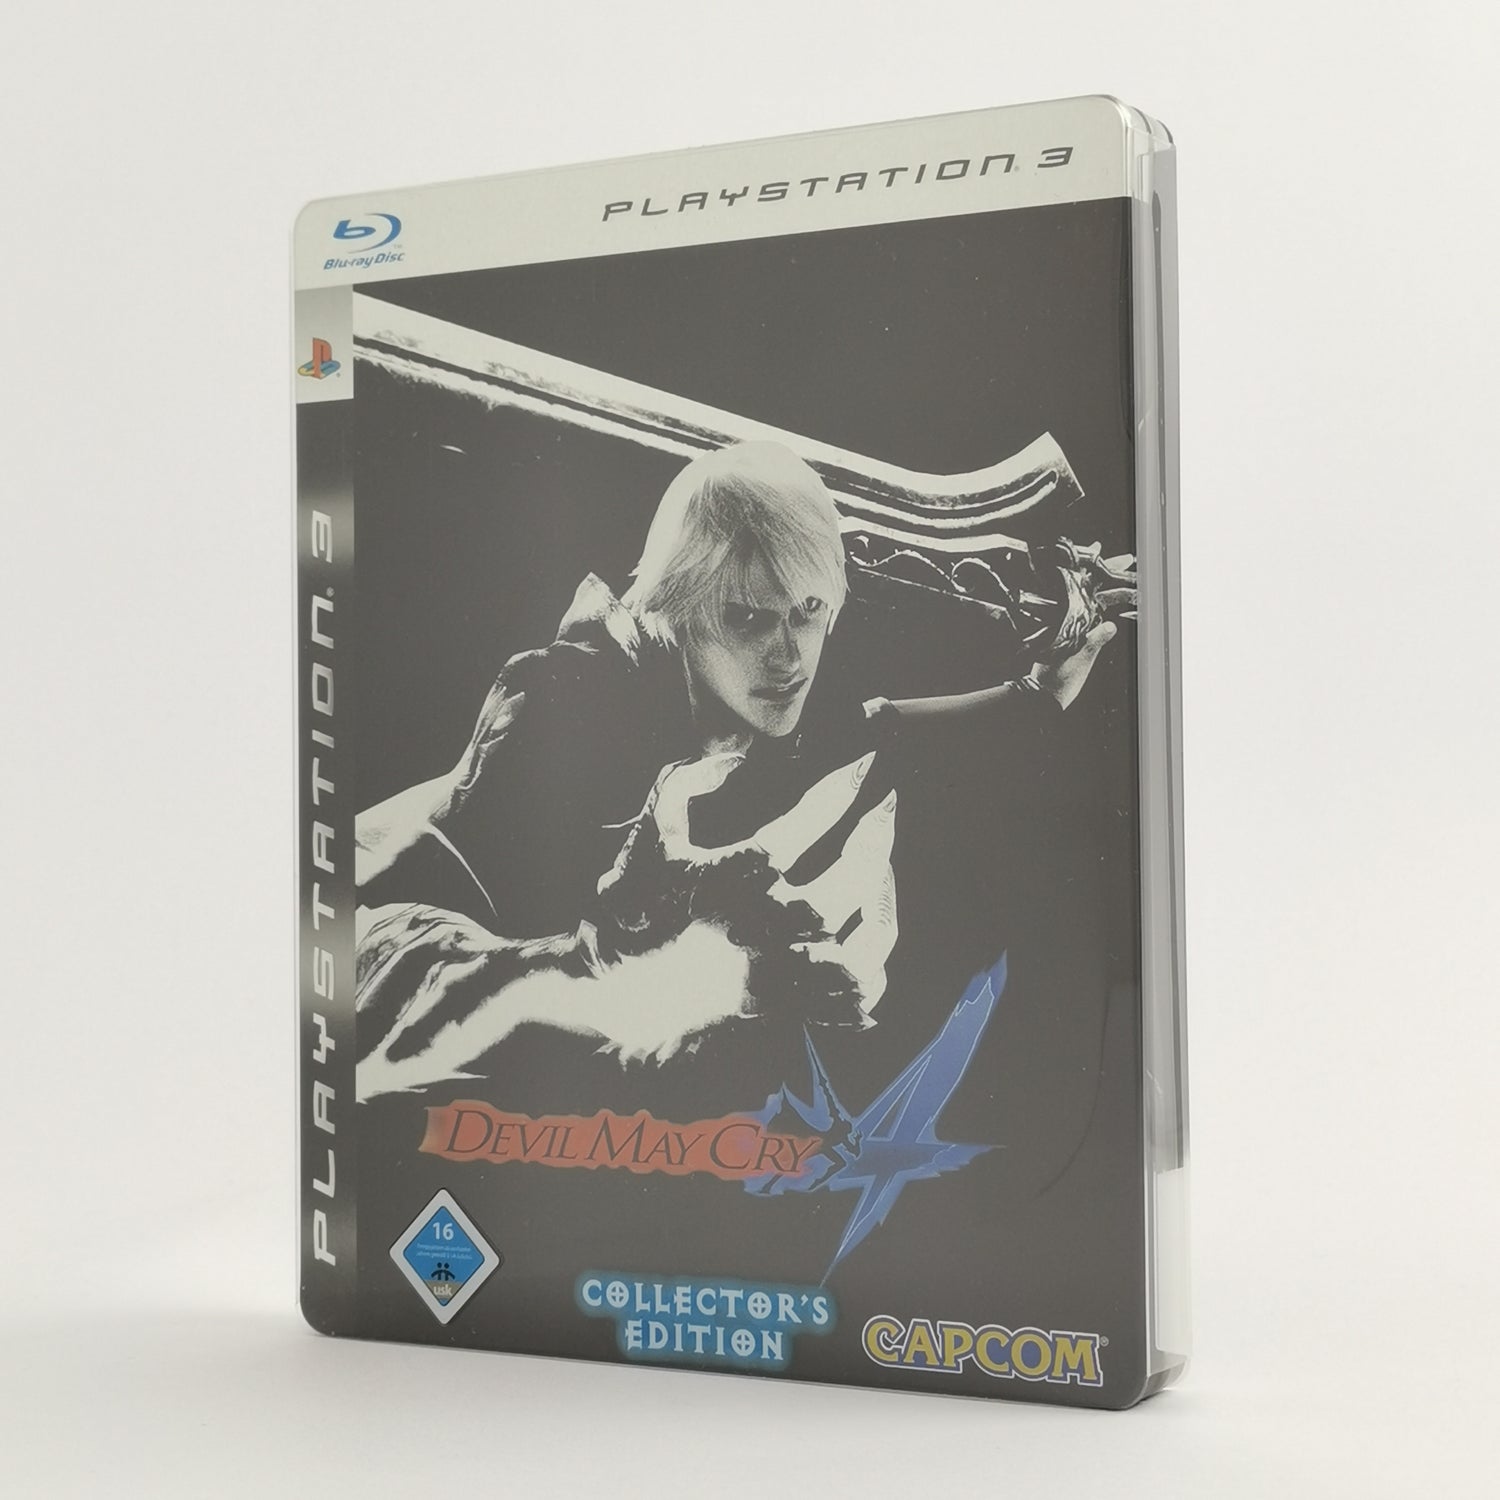 Sony Playstation 3 Game: Devil May Cry Collectors Edition | PS3 game - original packaging